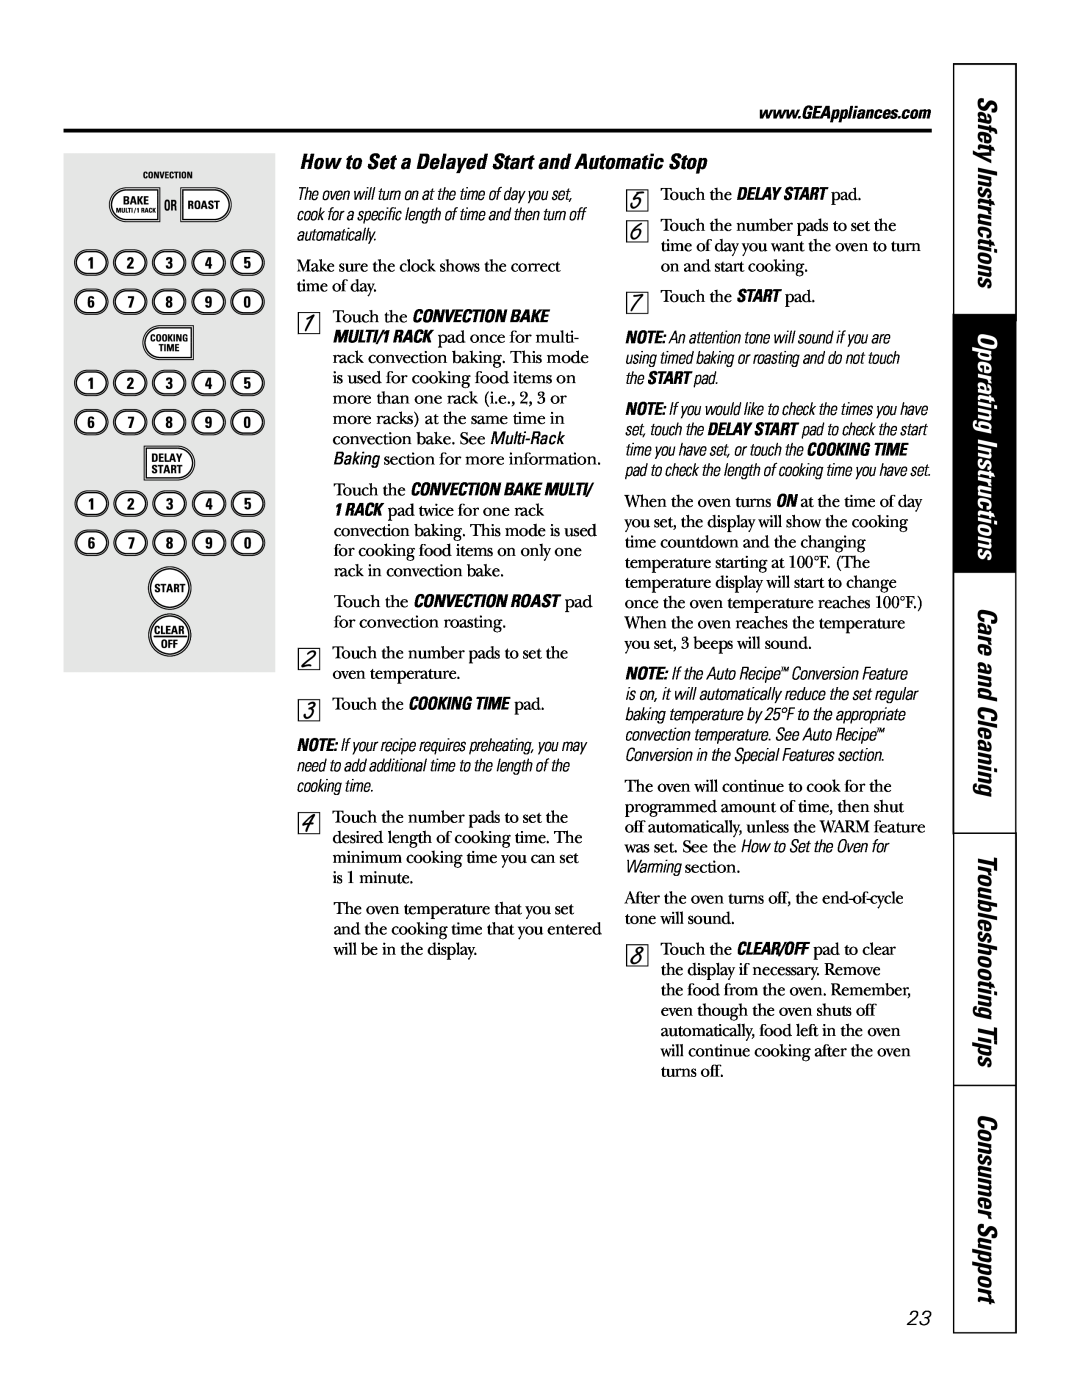 GE JB905 owner manual Safety, How to Set a Delayed Start and Automatic Stop 